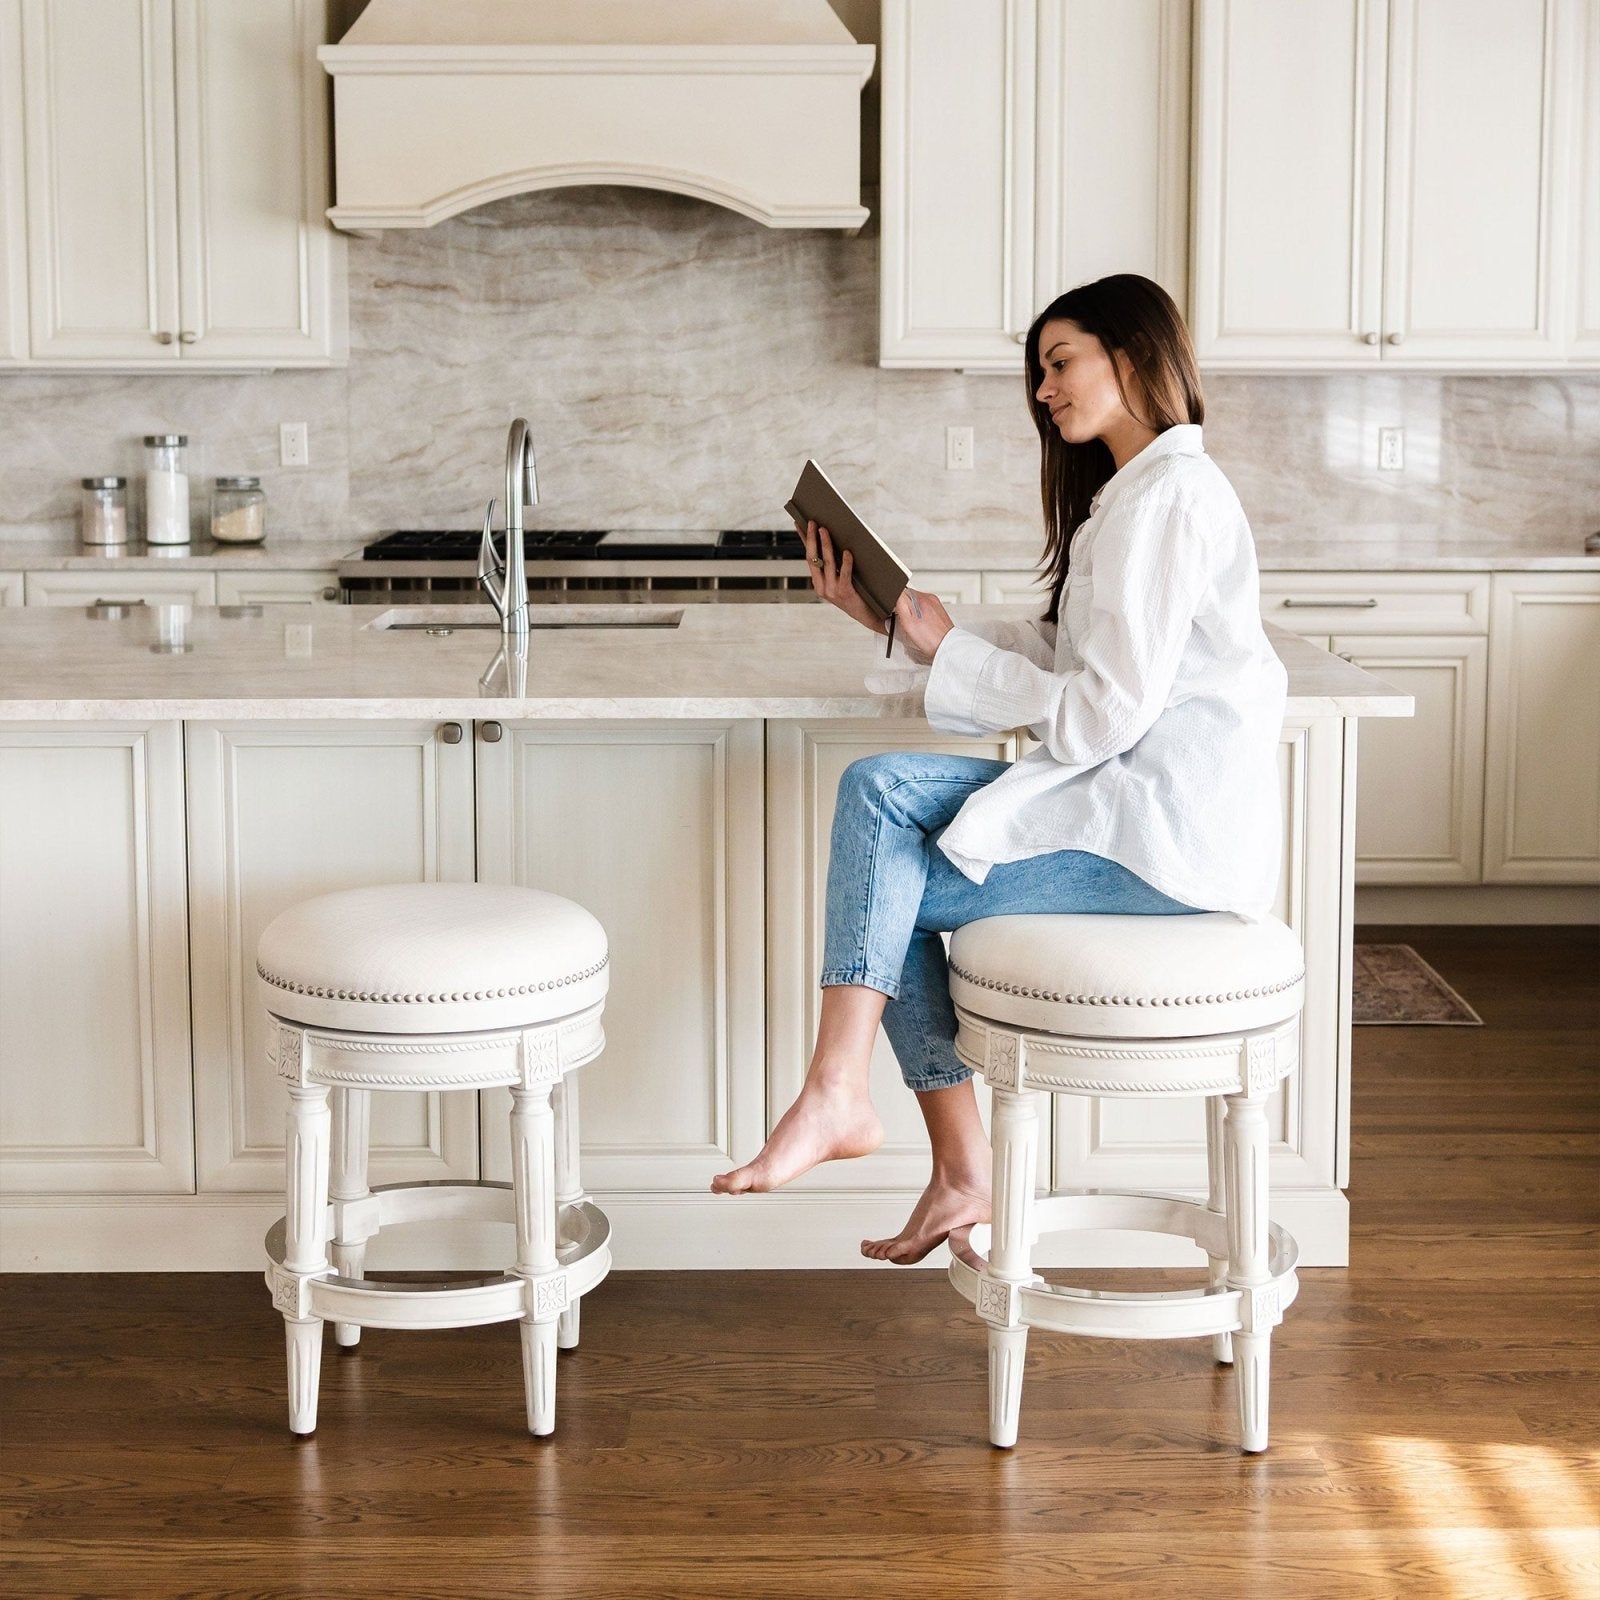 Pullman Backless Counter Stool in White Oak Finish with Natural Fabric Upholstery in Stools by Maven Lane